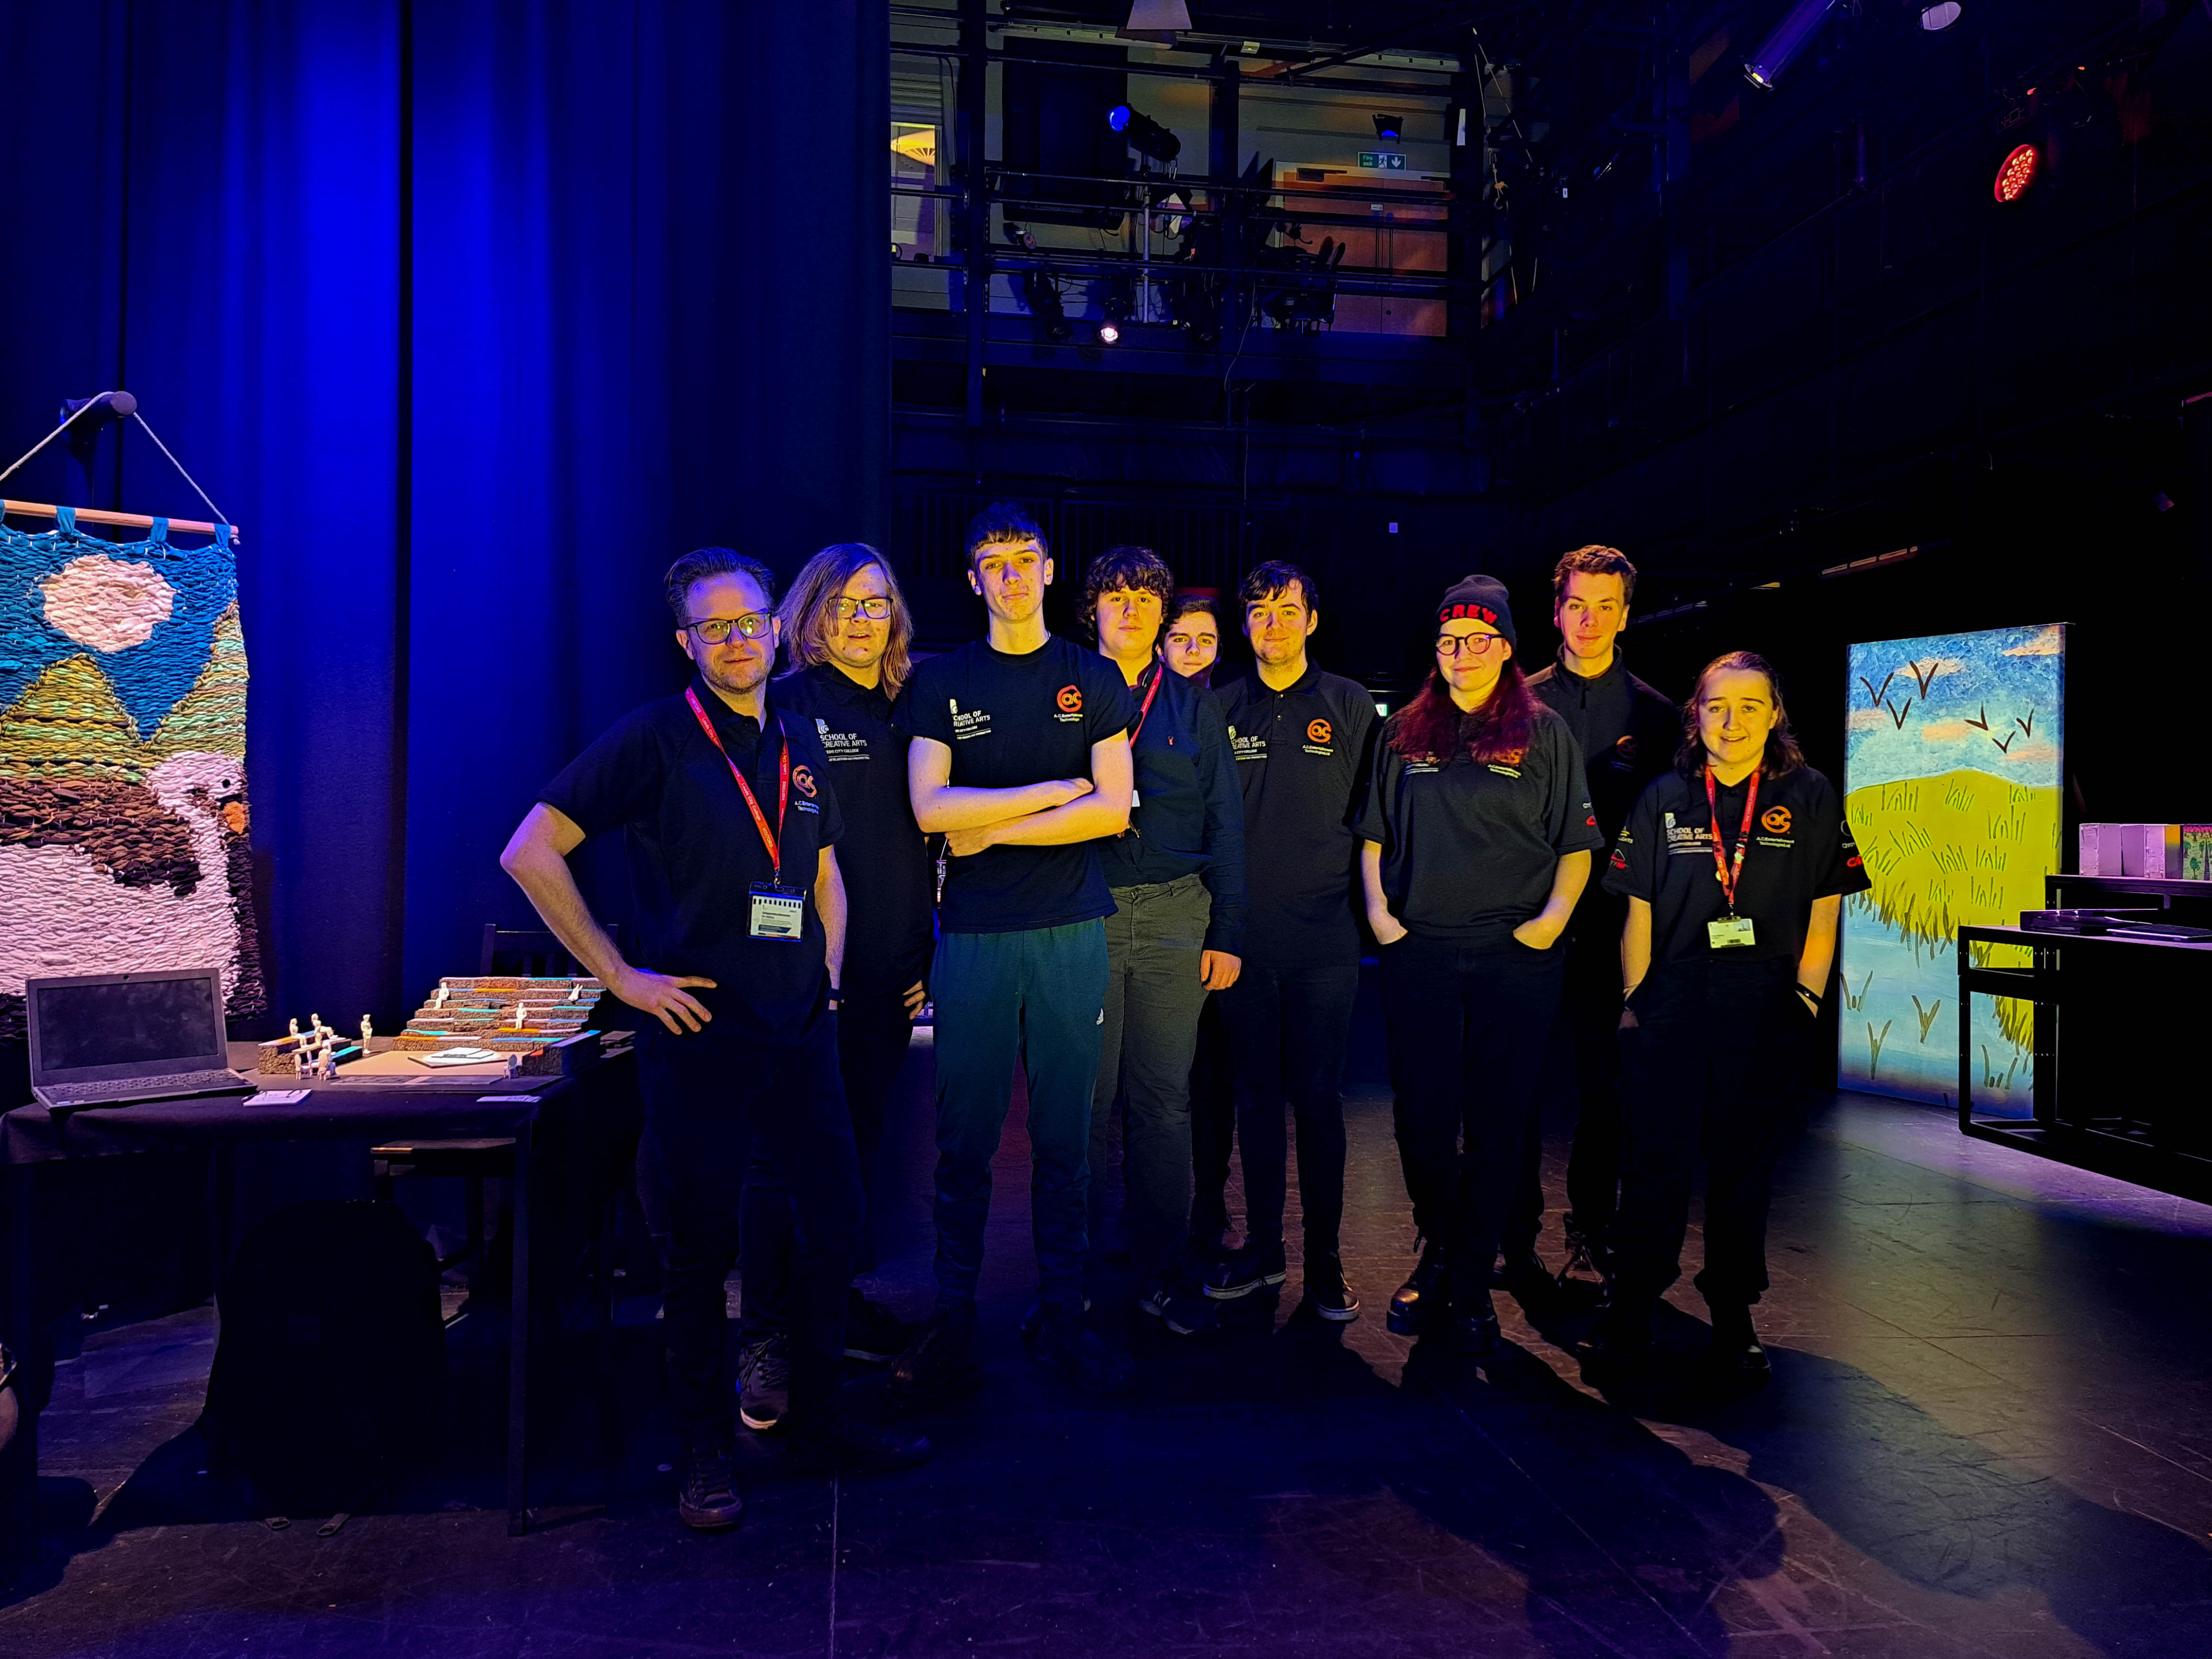 Chroma-Q Theatre at Leeds City College – A Day Spent With Friends!